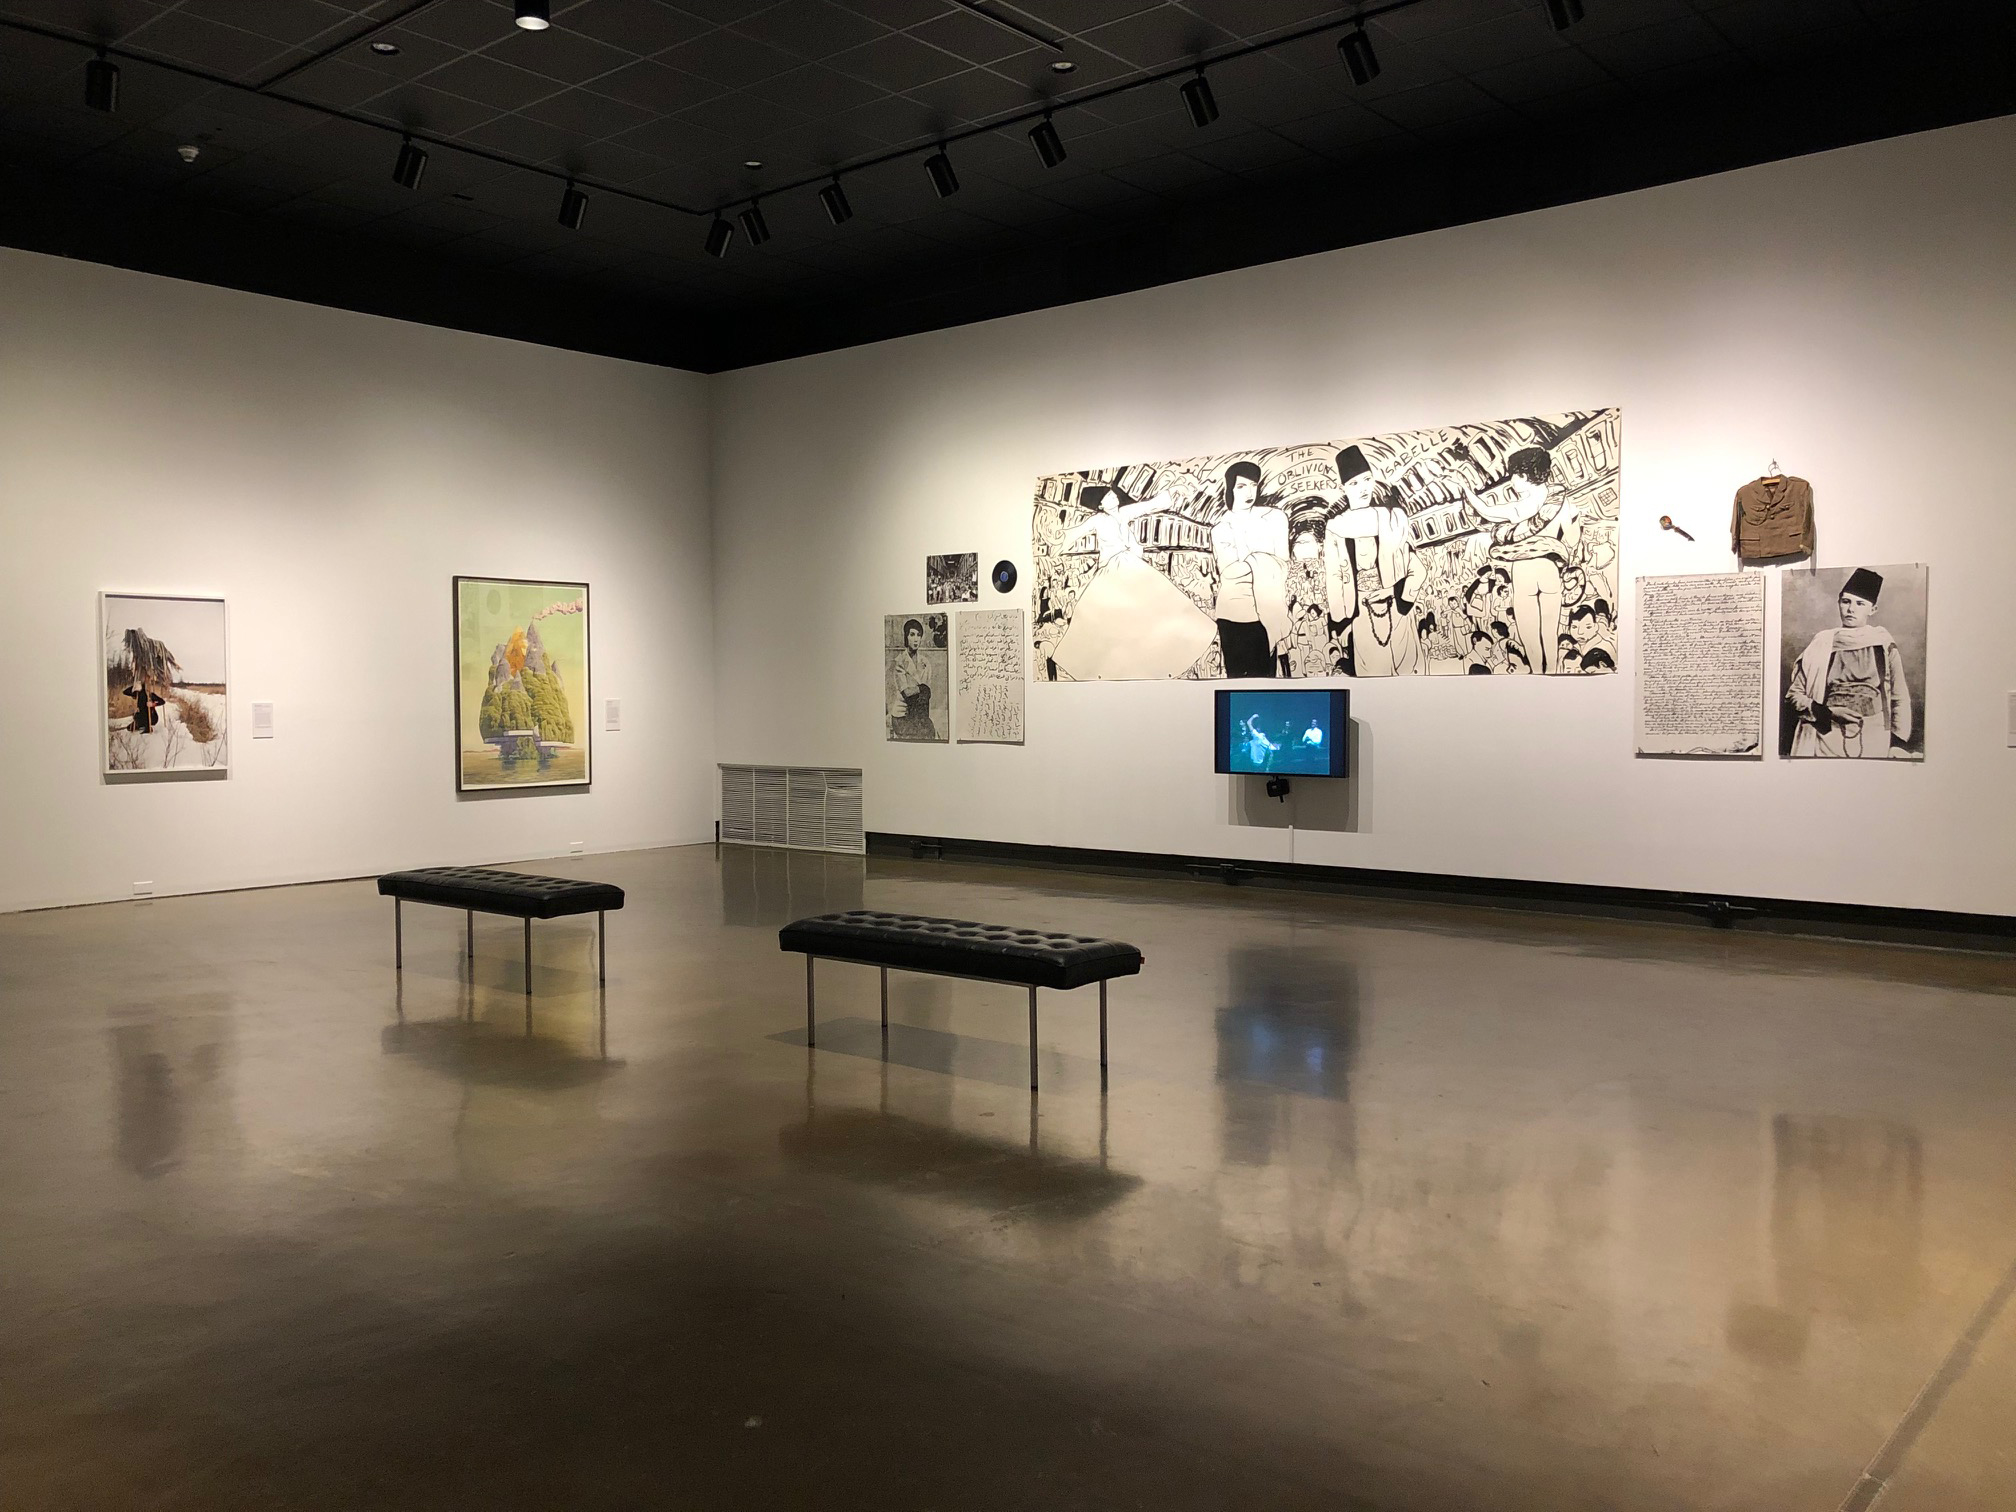 Installation view of At the far edge of worlds showing two framed works and a large mixed media installation with video